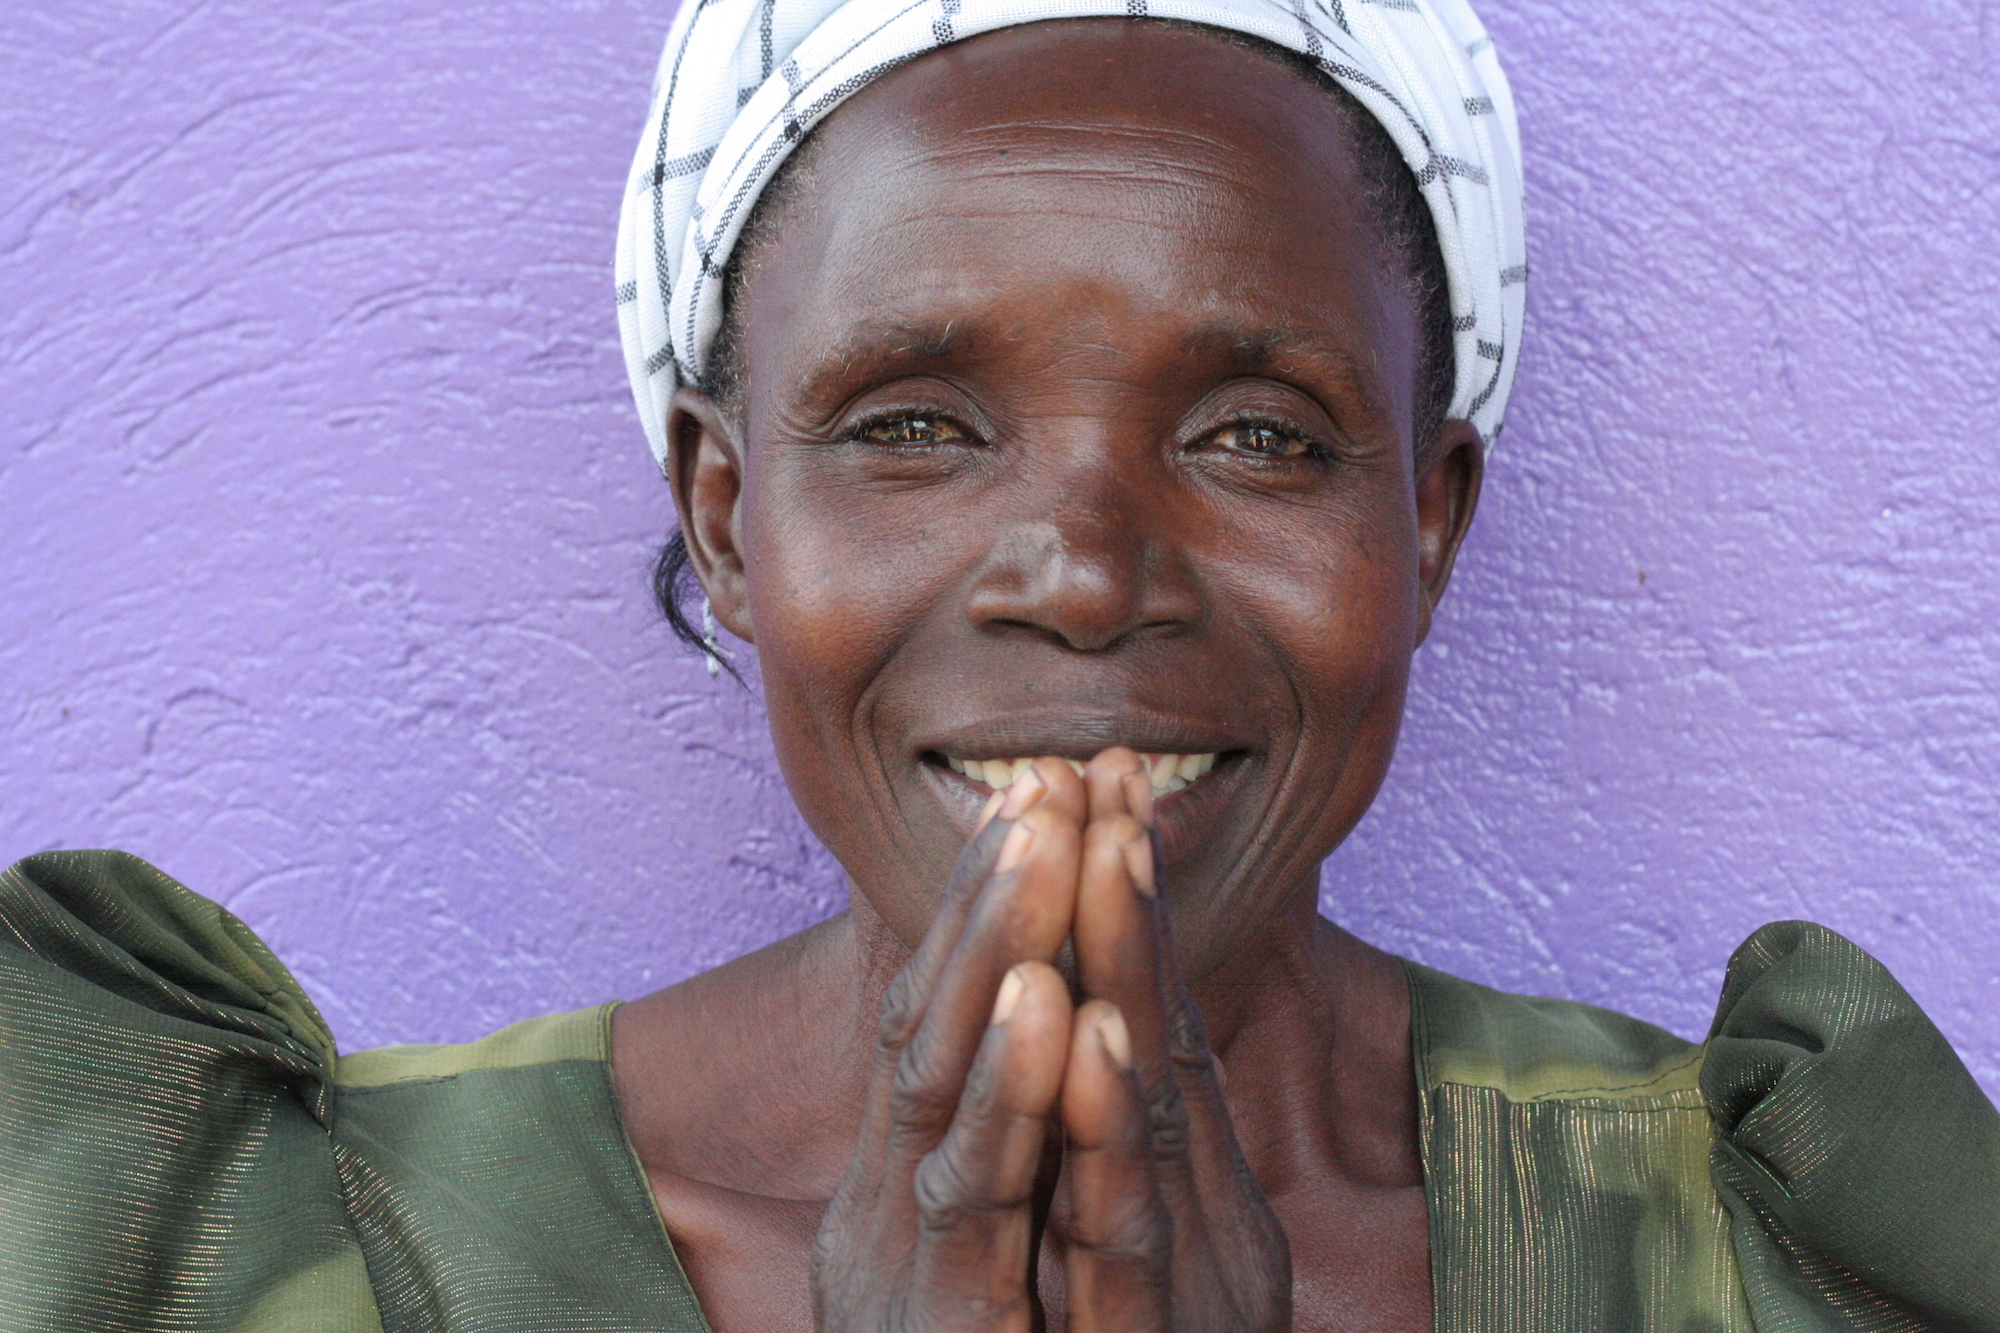 Woman in front of a purple wall with her hands raised as in prayer